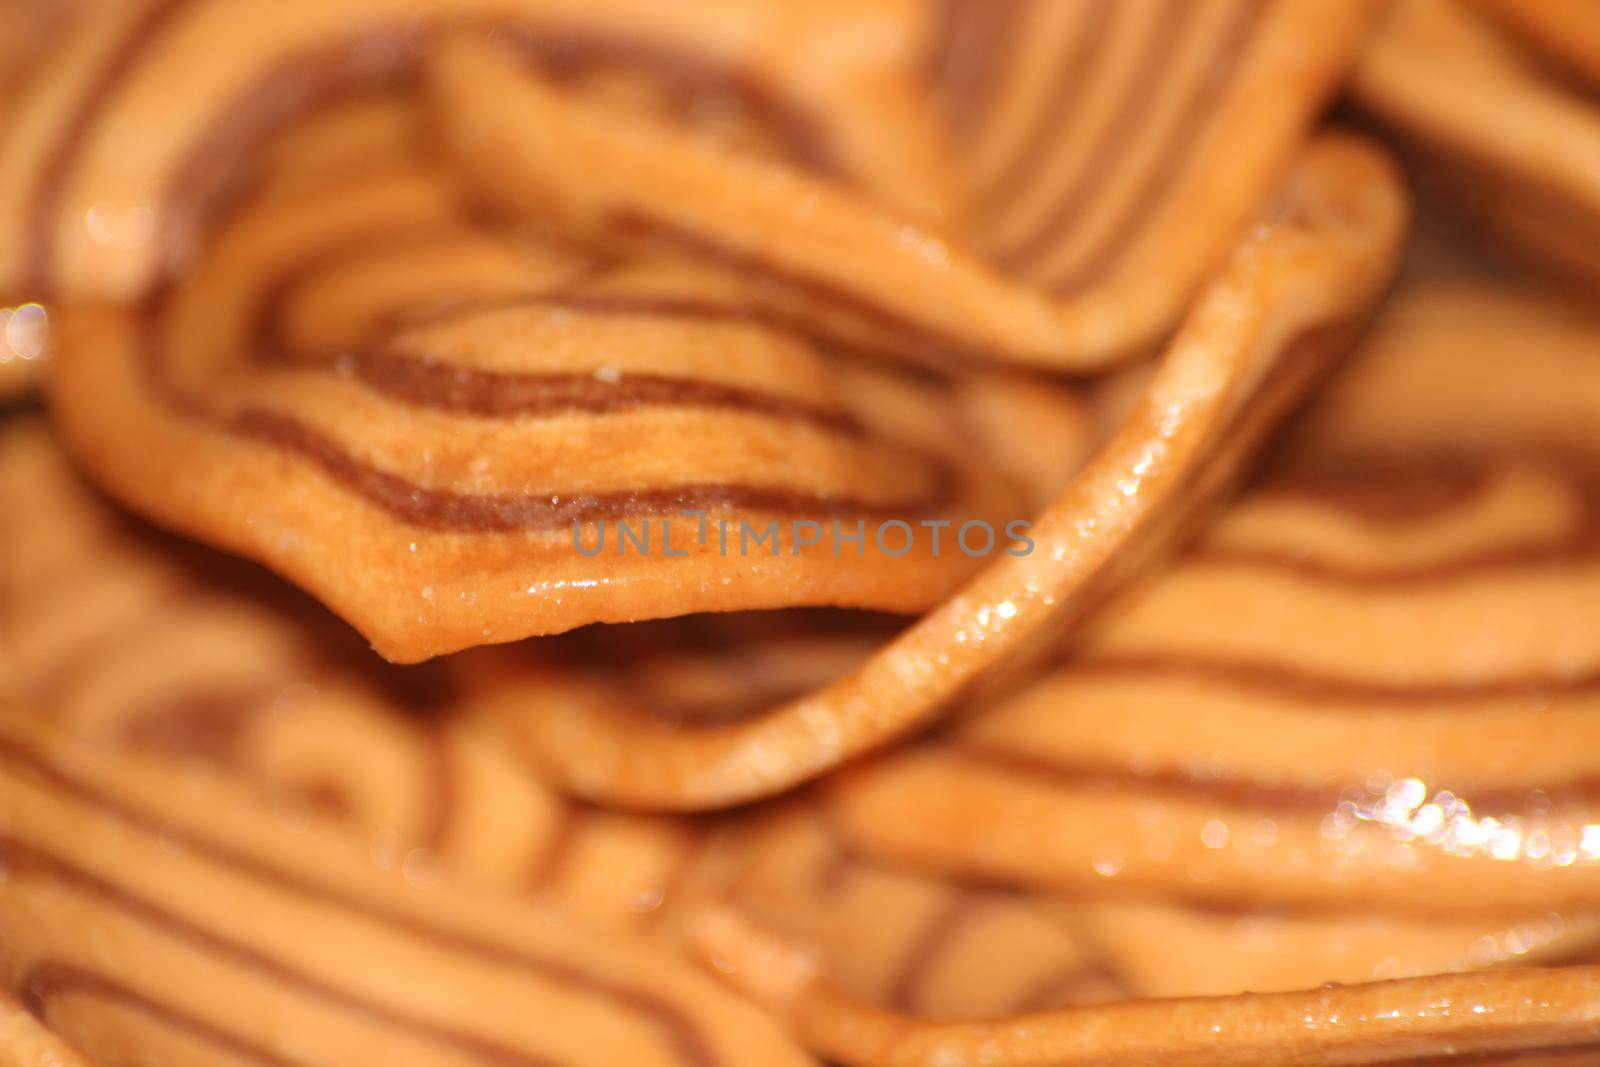 Closeup view with selective focus of a large number of round cookies by Photochowk